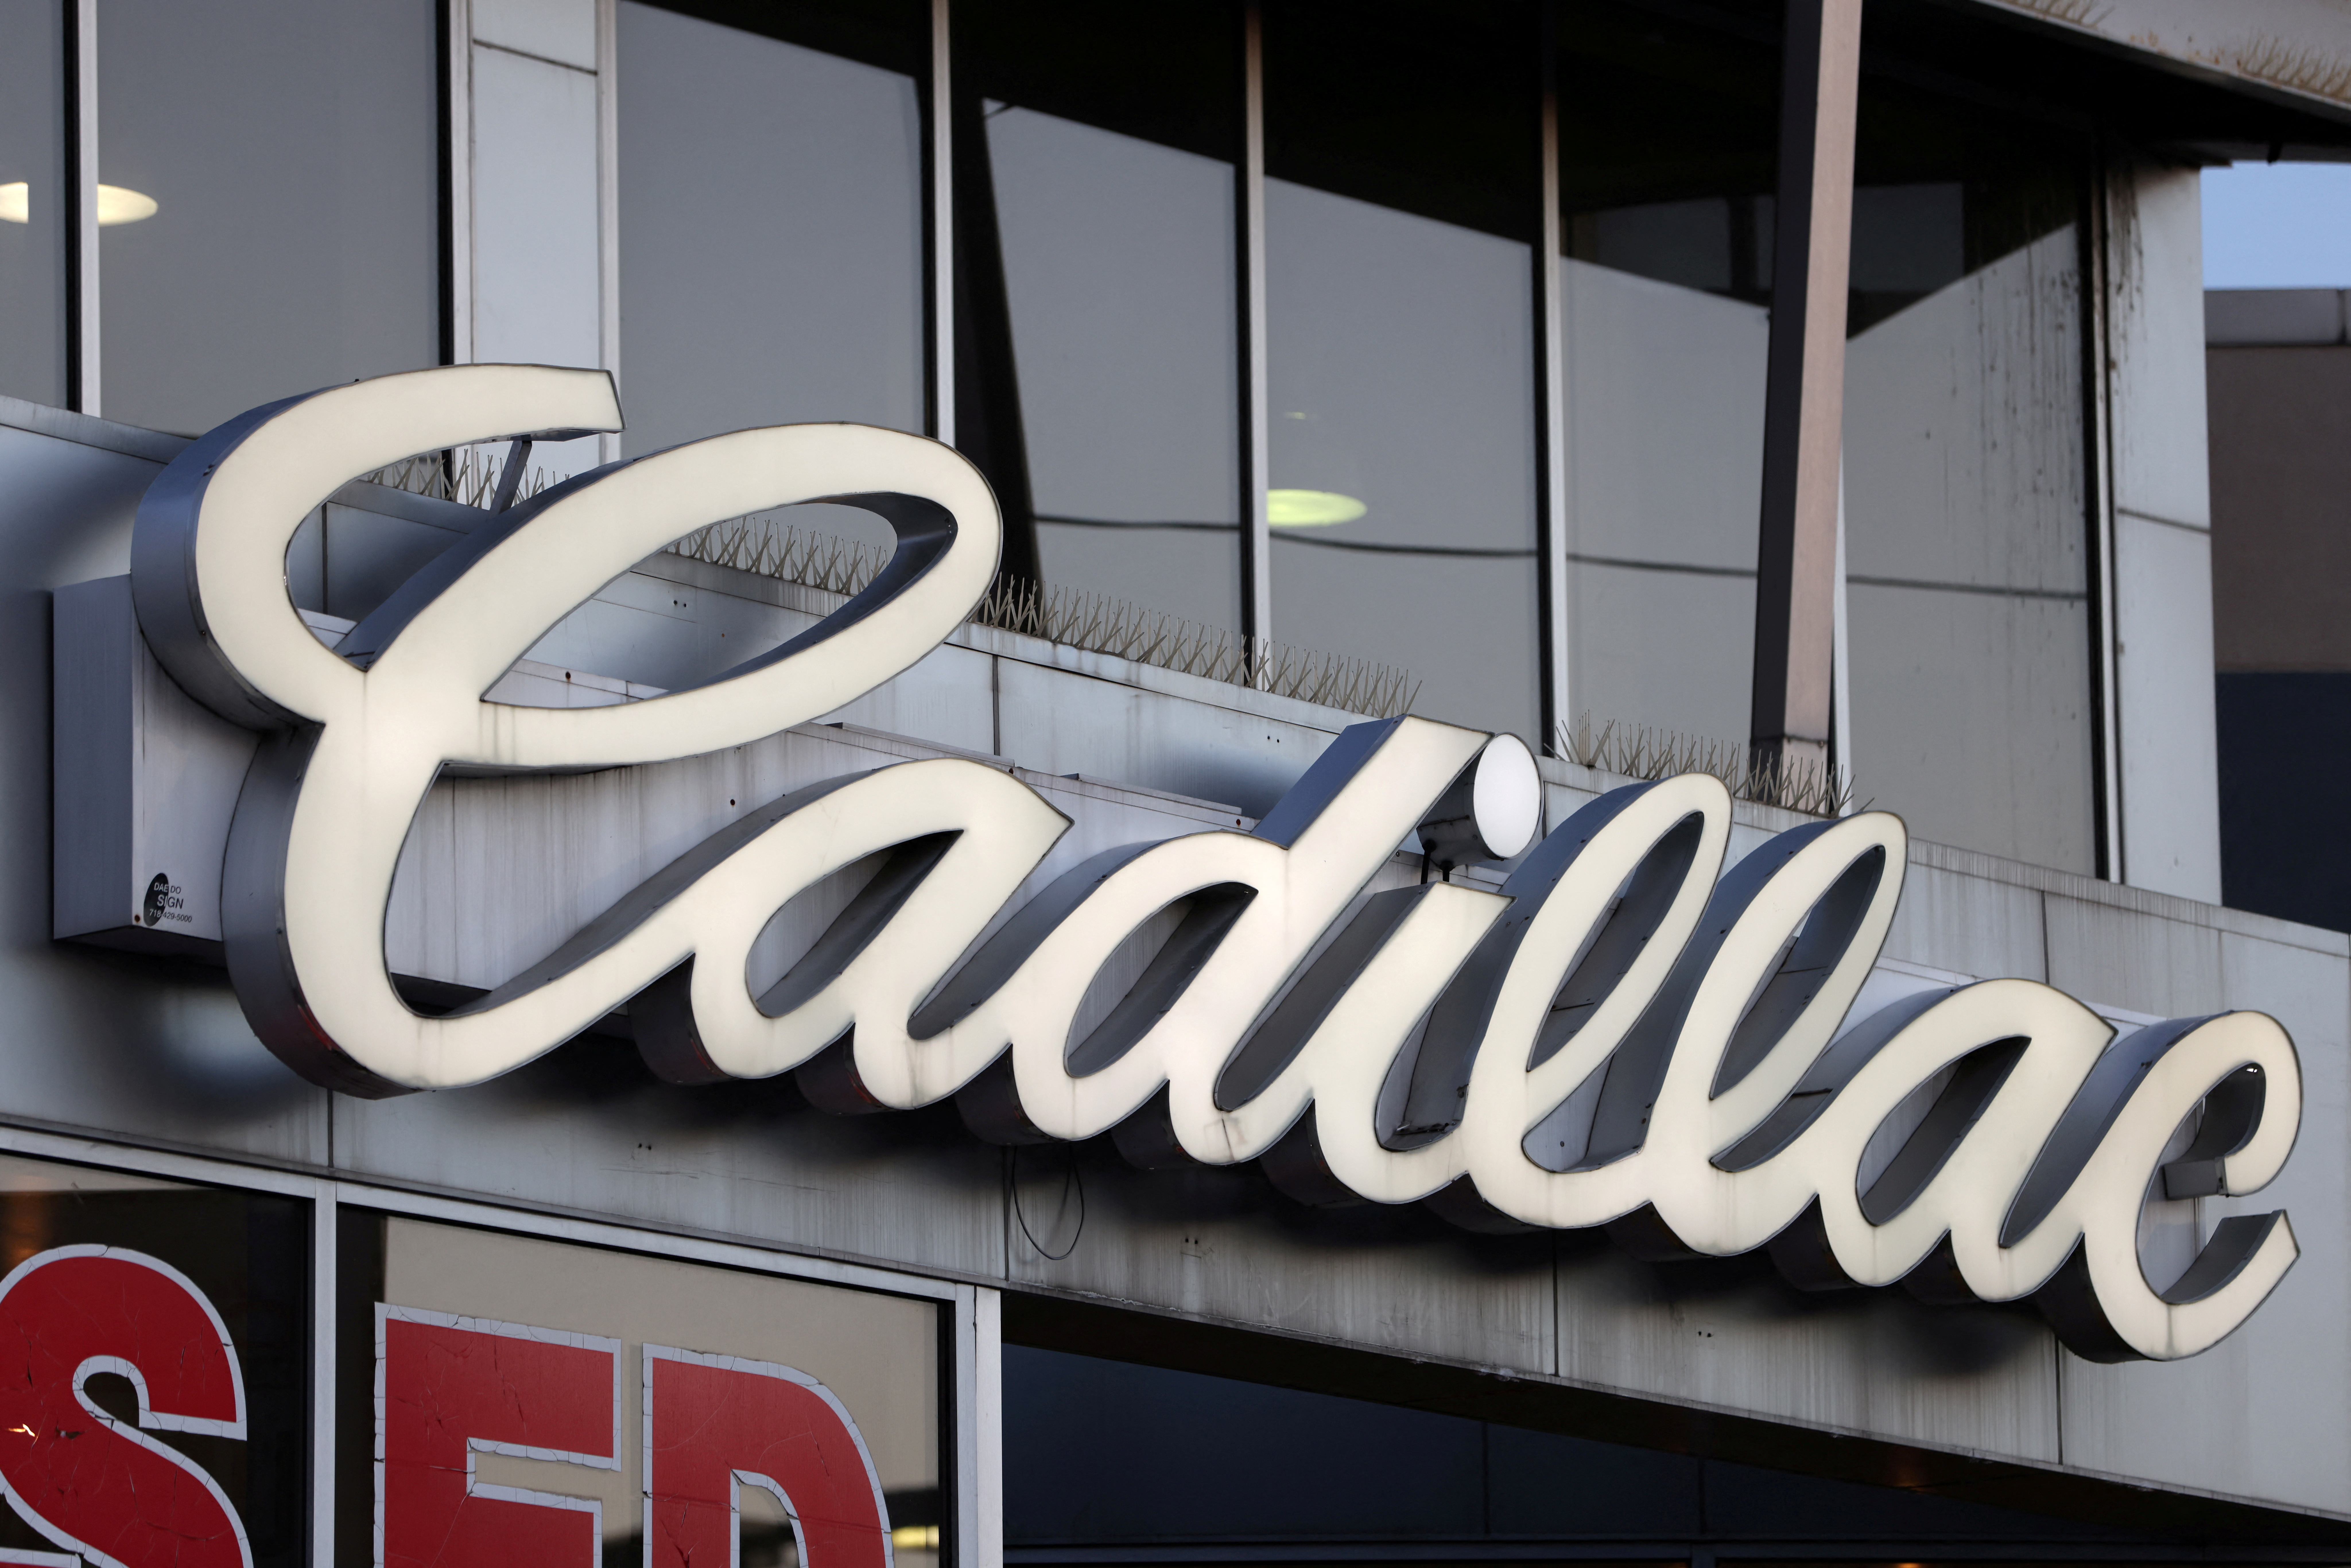 Signage for Cadillac, an automobile brand owned by General Motors Company, is seen at a car dealership in Queens, New York